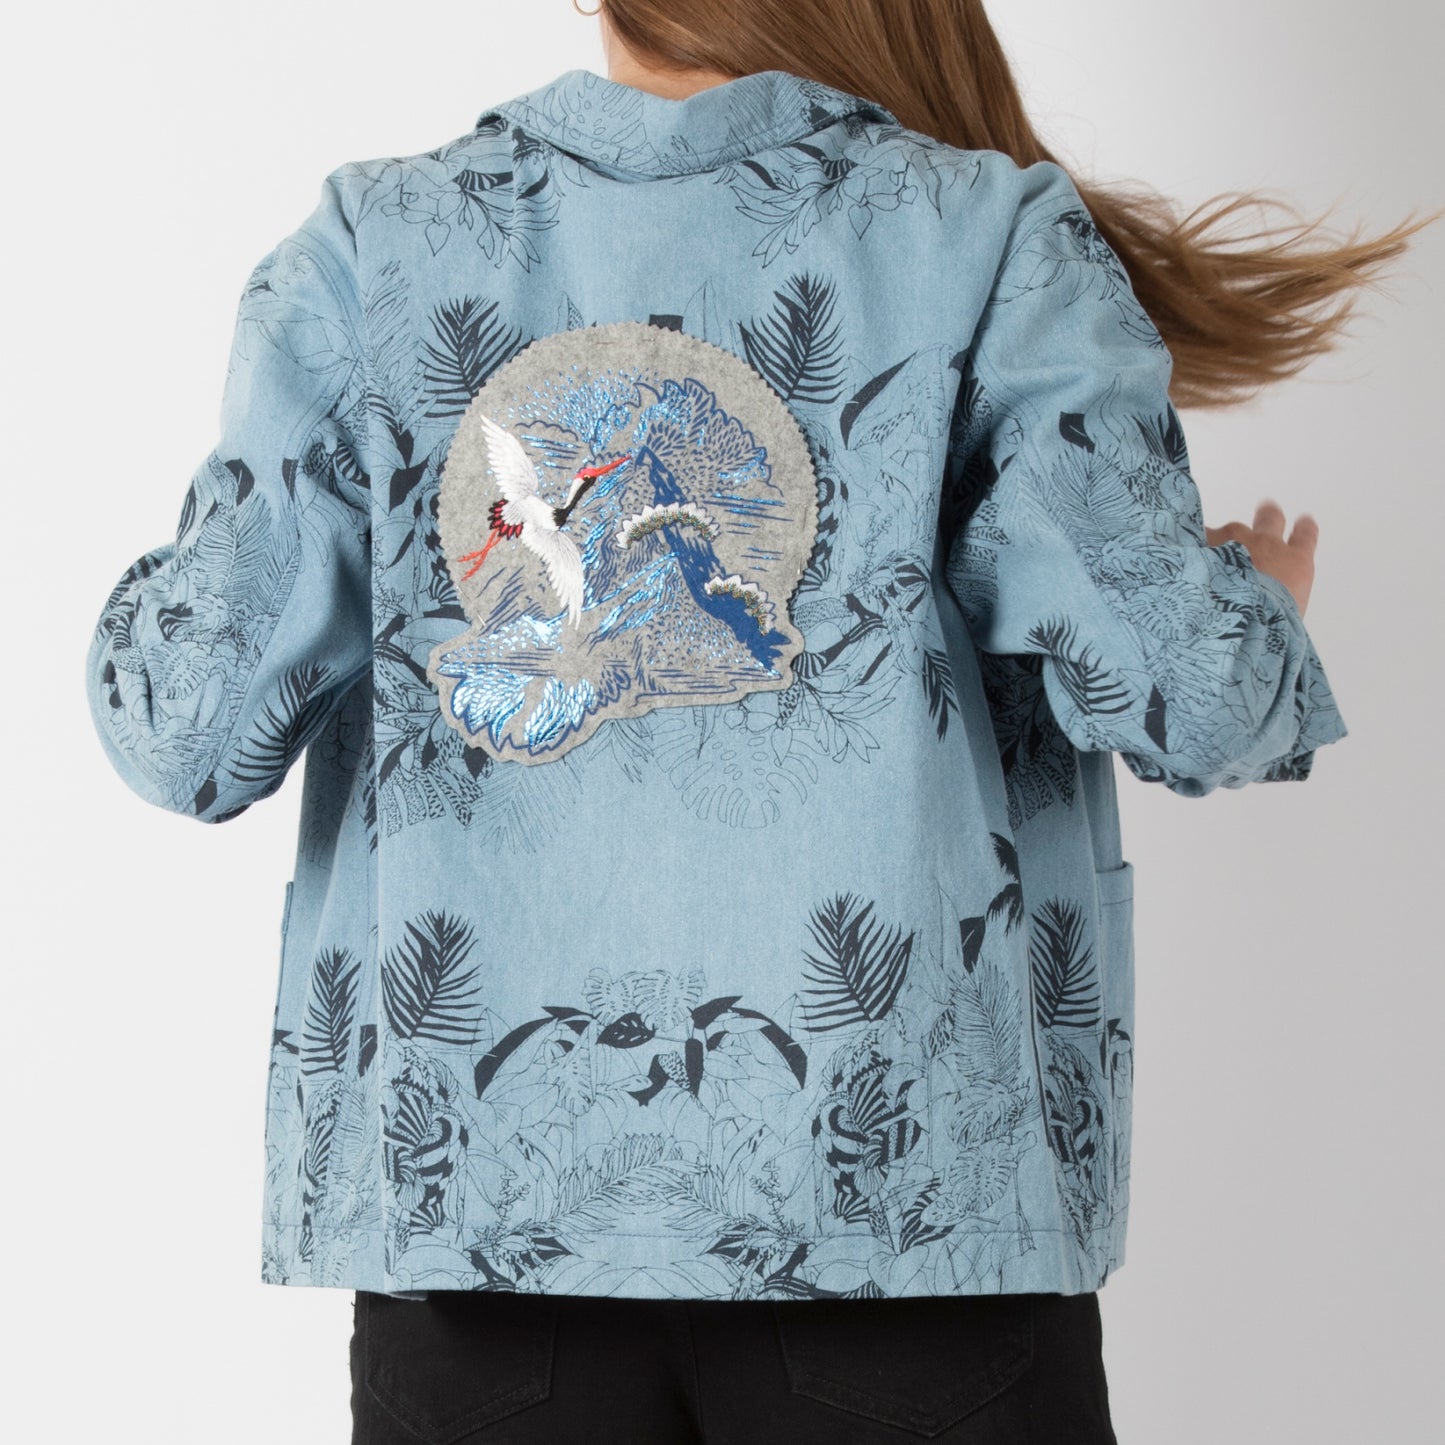 Foil printed & embroidered mountain crane patch shown on the back of a patterened light blue denim jacket